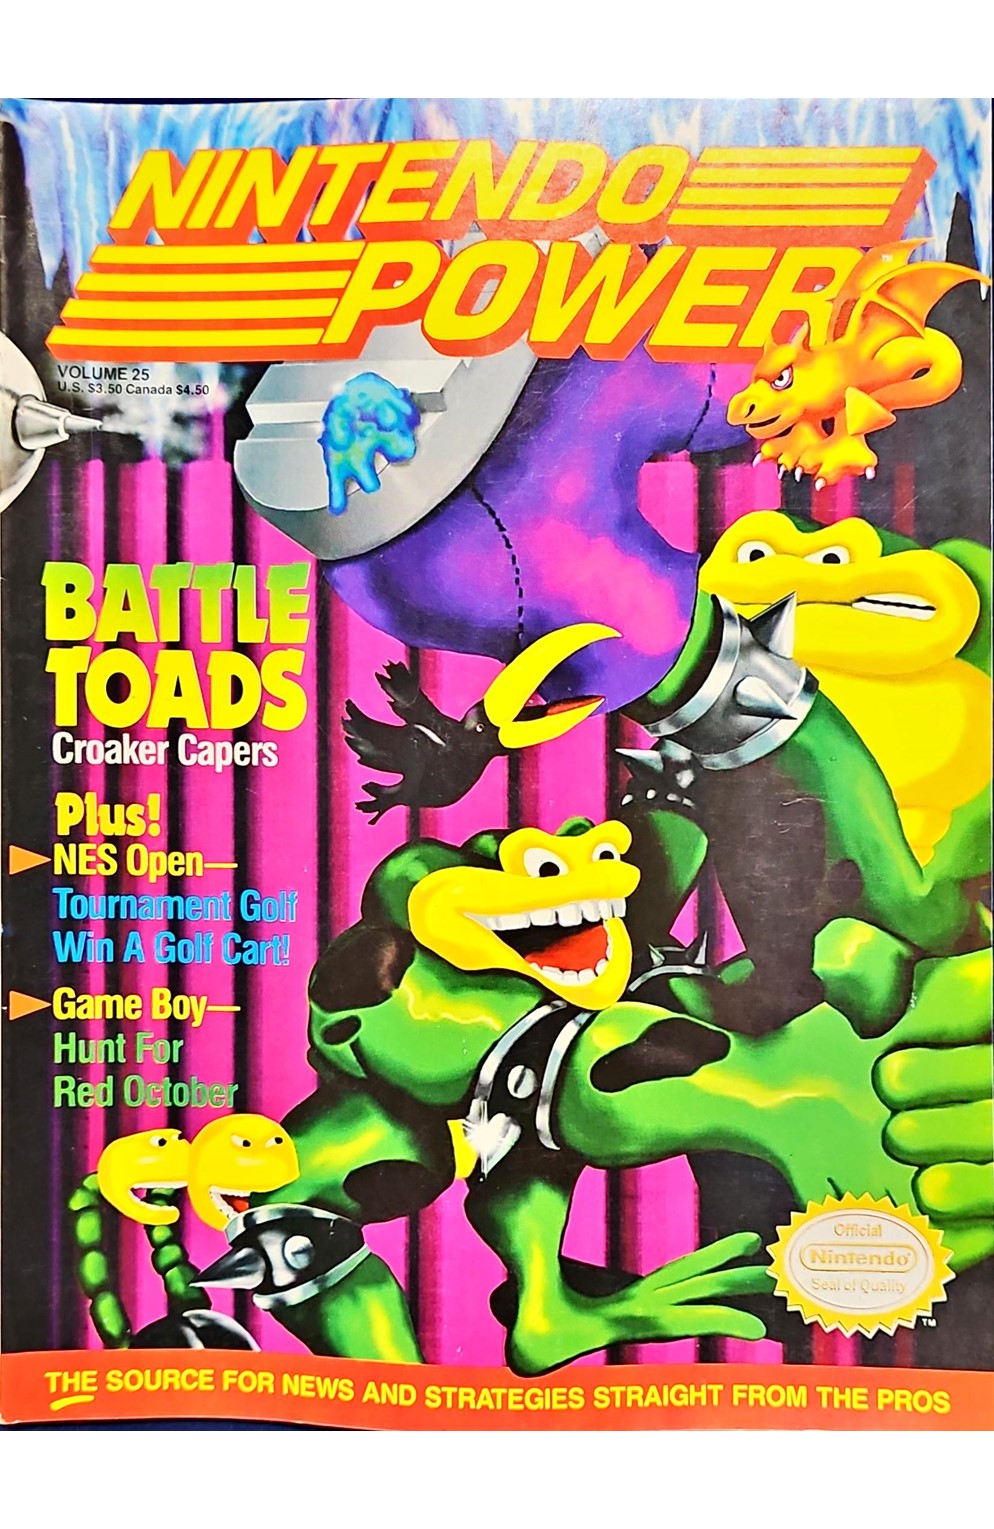 Nintendo Power Volume 25 Battle Toads With Poster